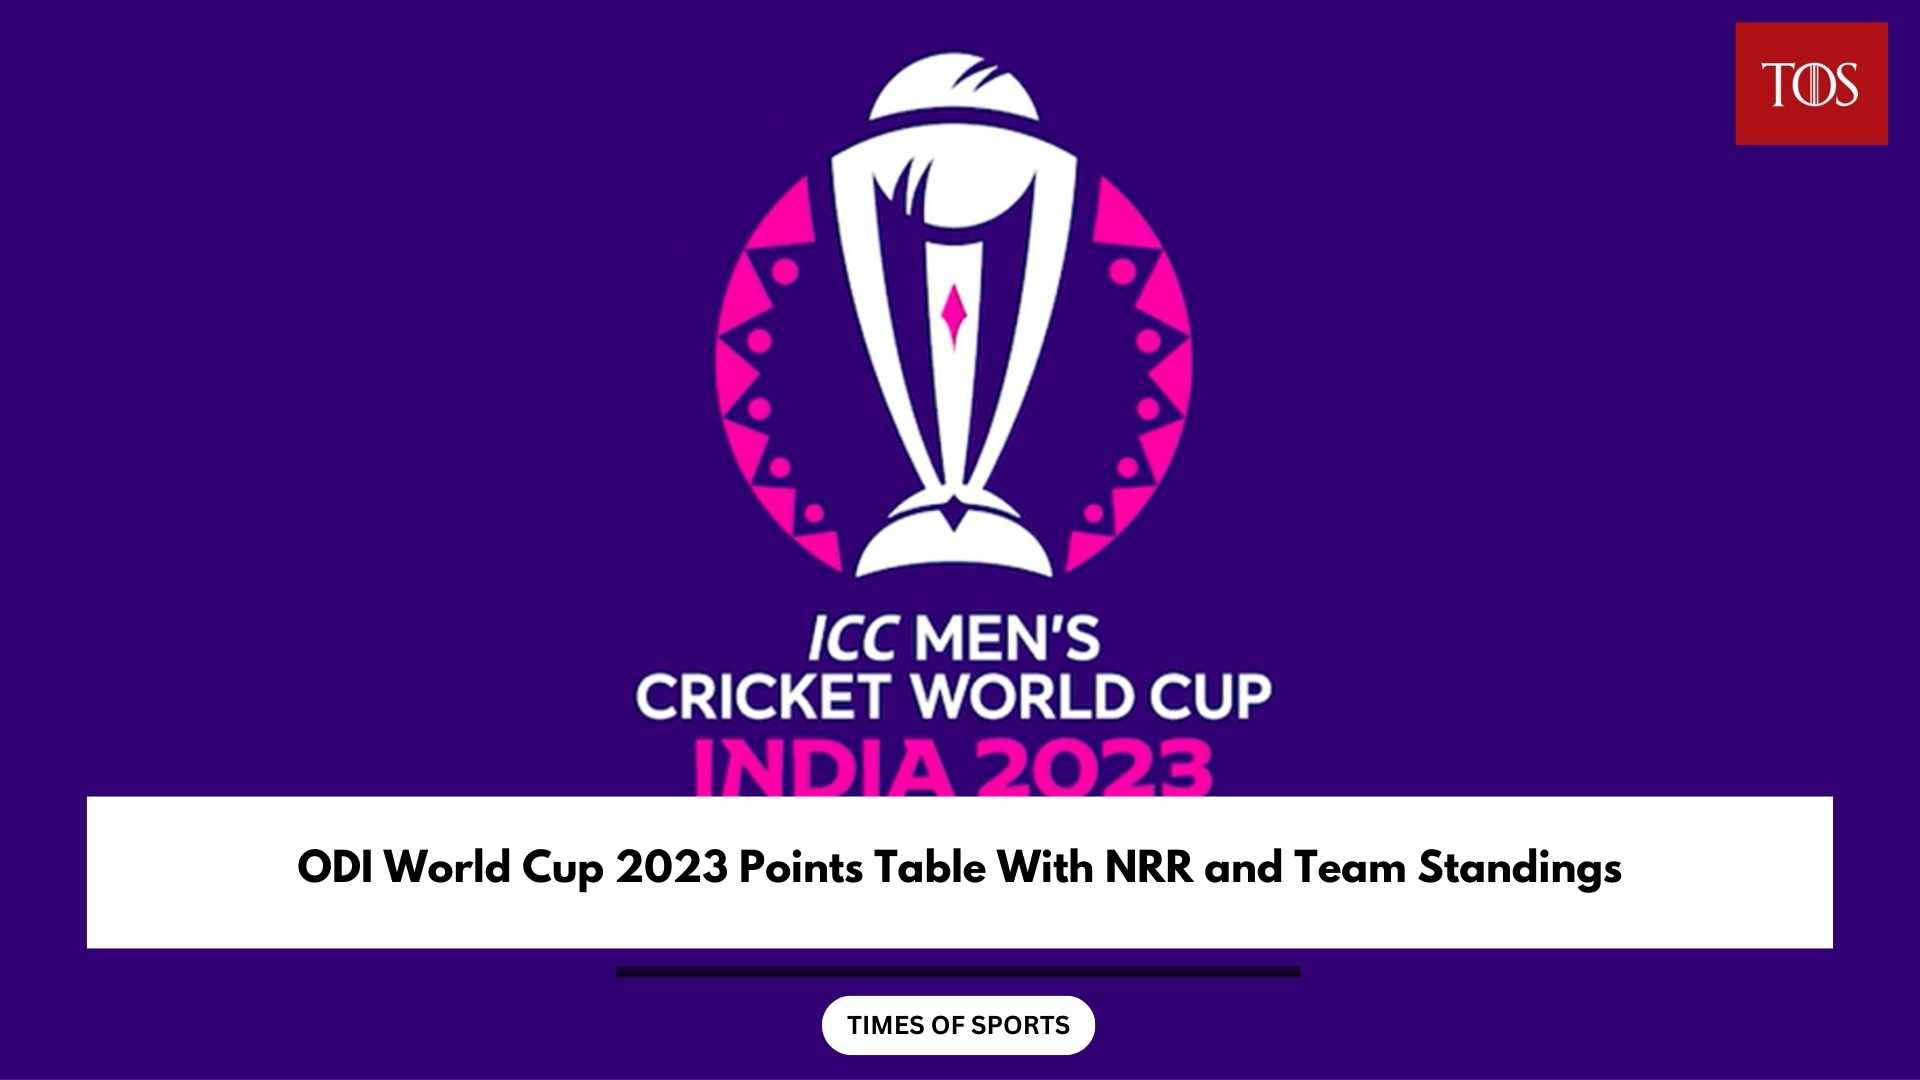 ODI World Cup 2023 Points Table With NRR and Team Standings